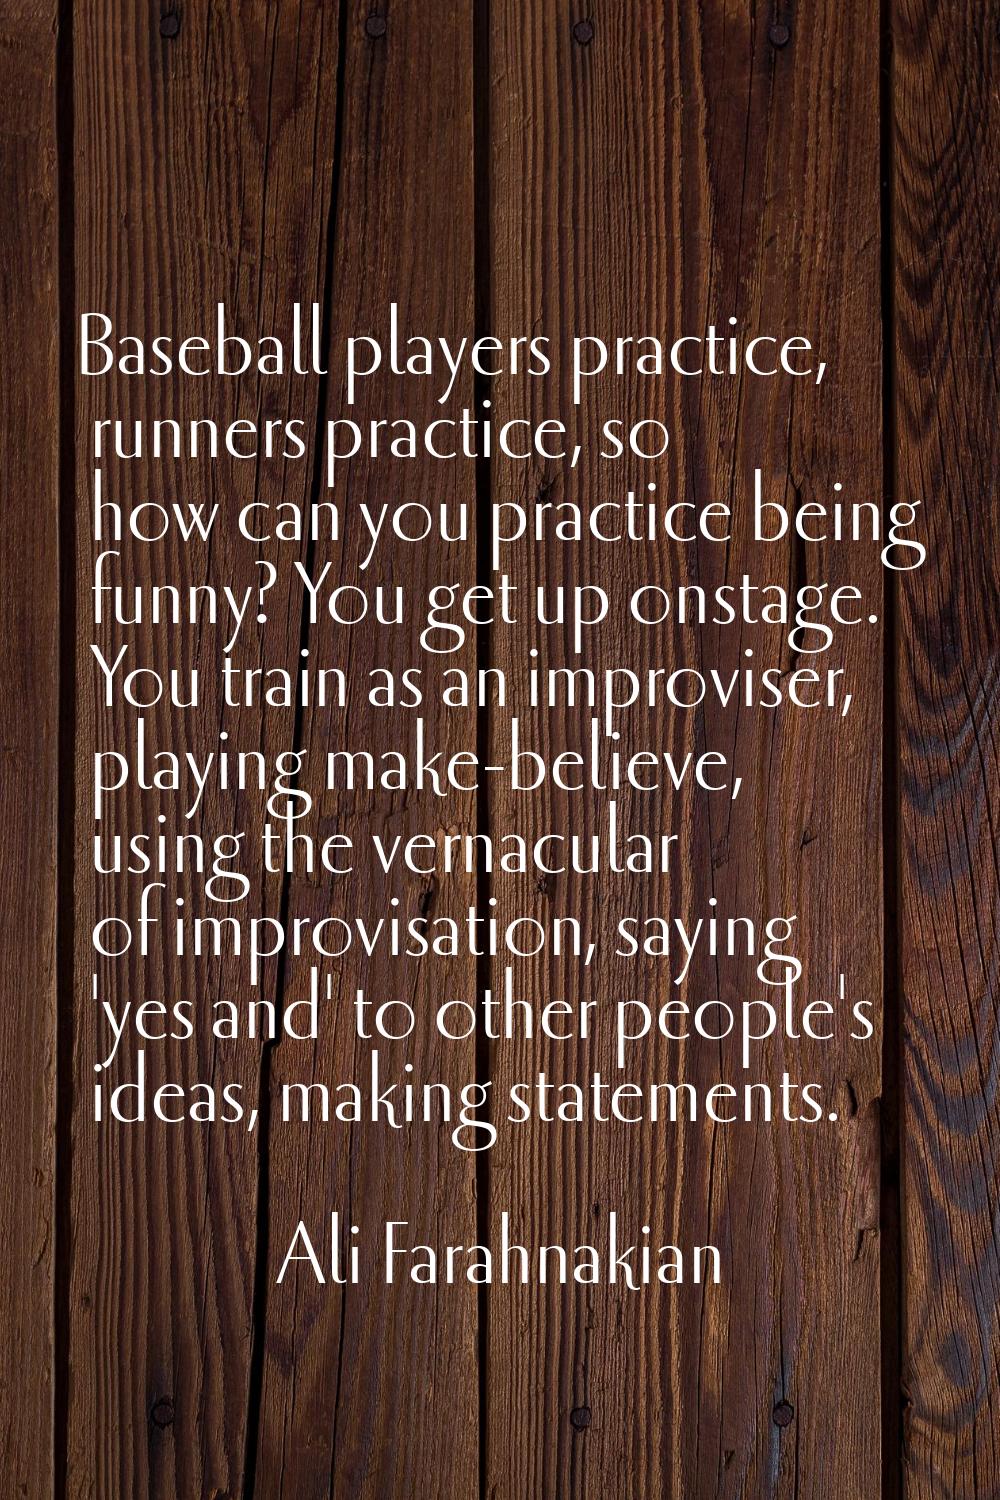 Baseball players practice, runners practice, so how can you practice being funny? You get up onstag